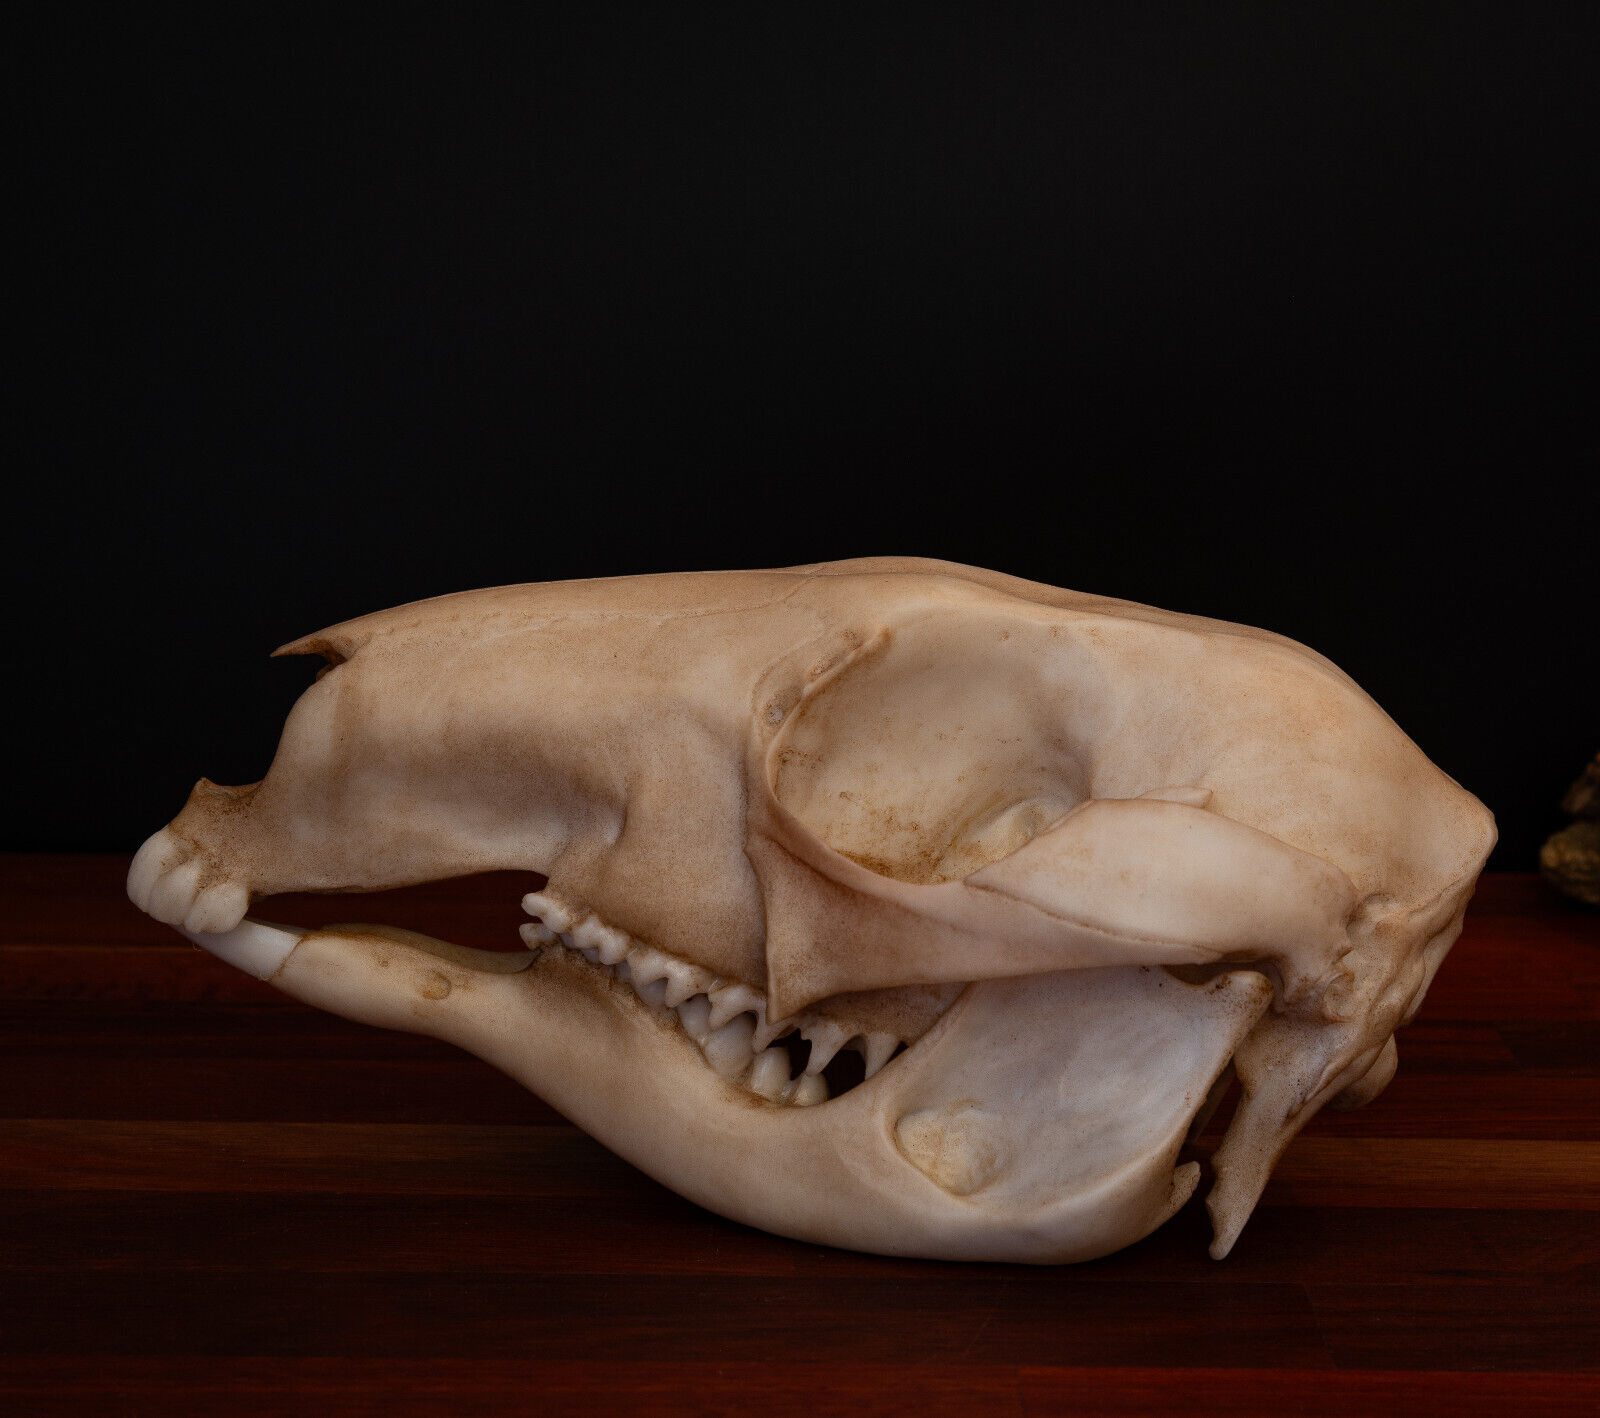 Kangaroo Skull-Replica - Resin Printed High Quality Piece - FREE delivery world